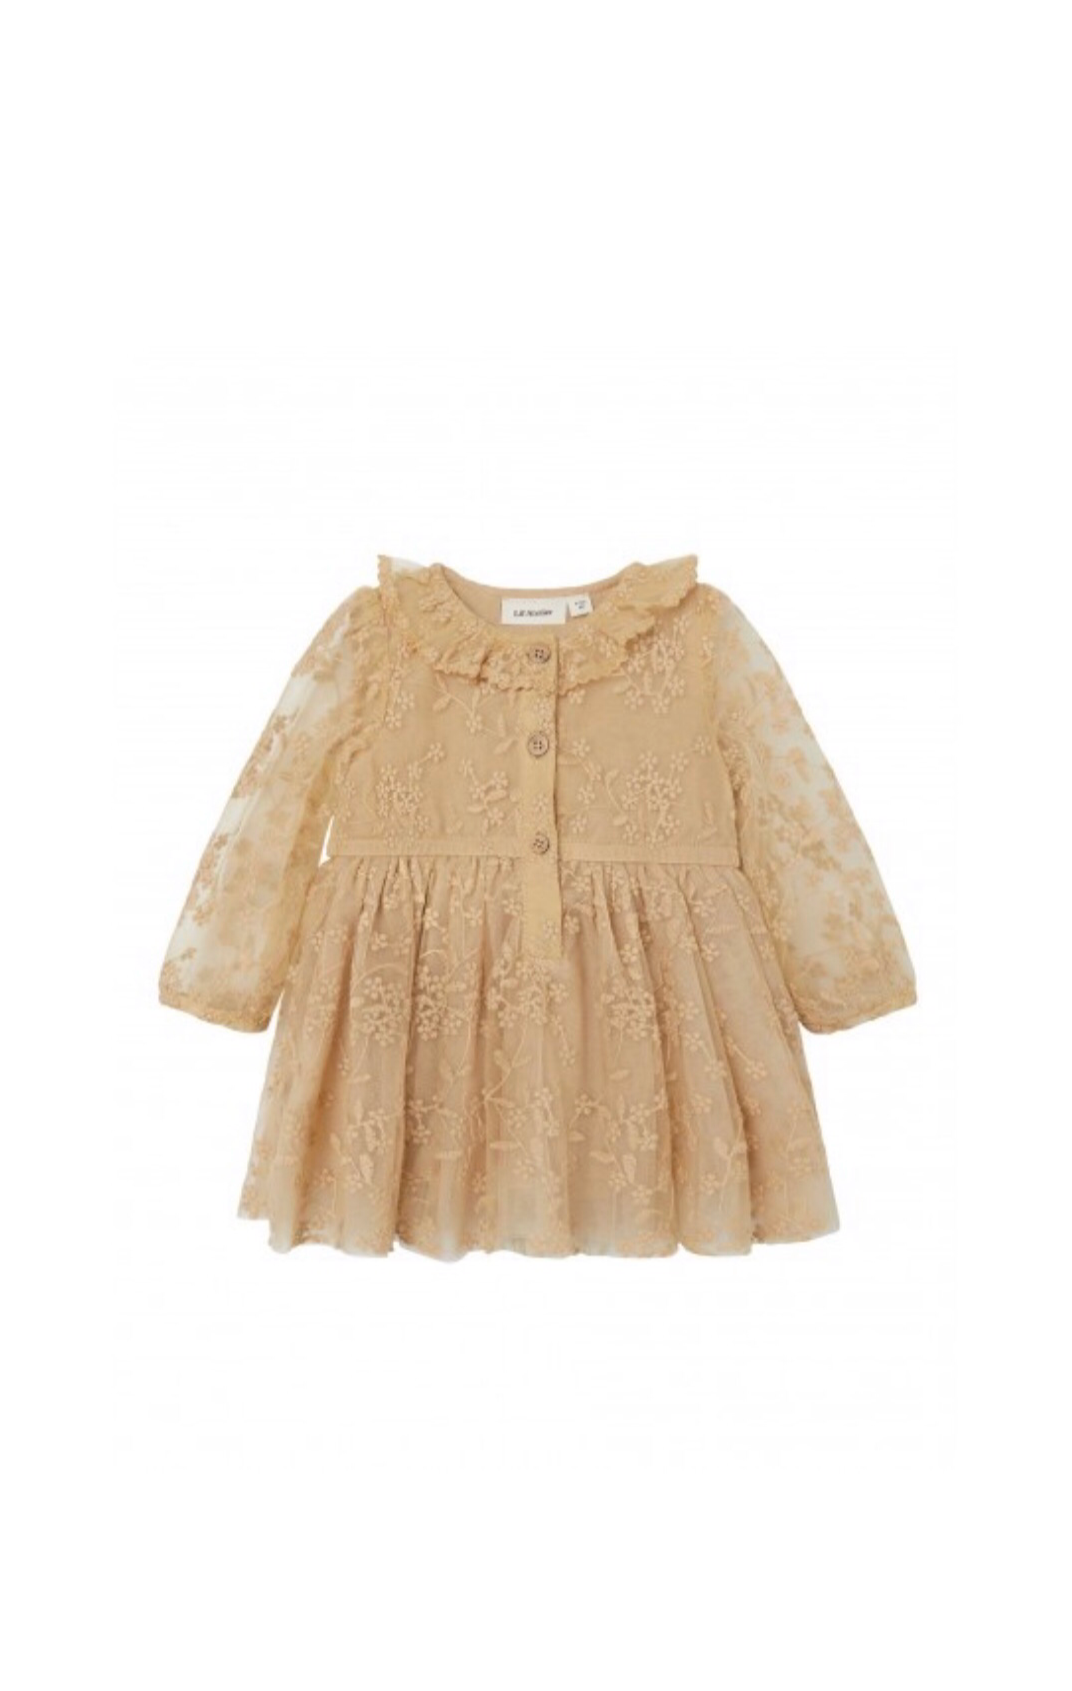 Lace embroidered cotton dress